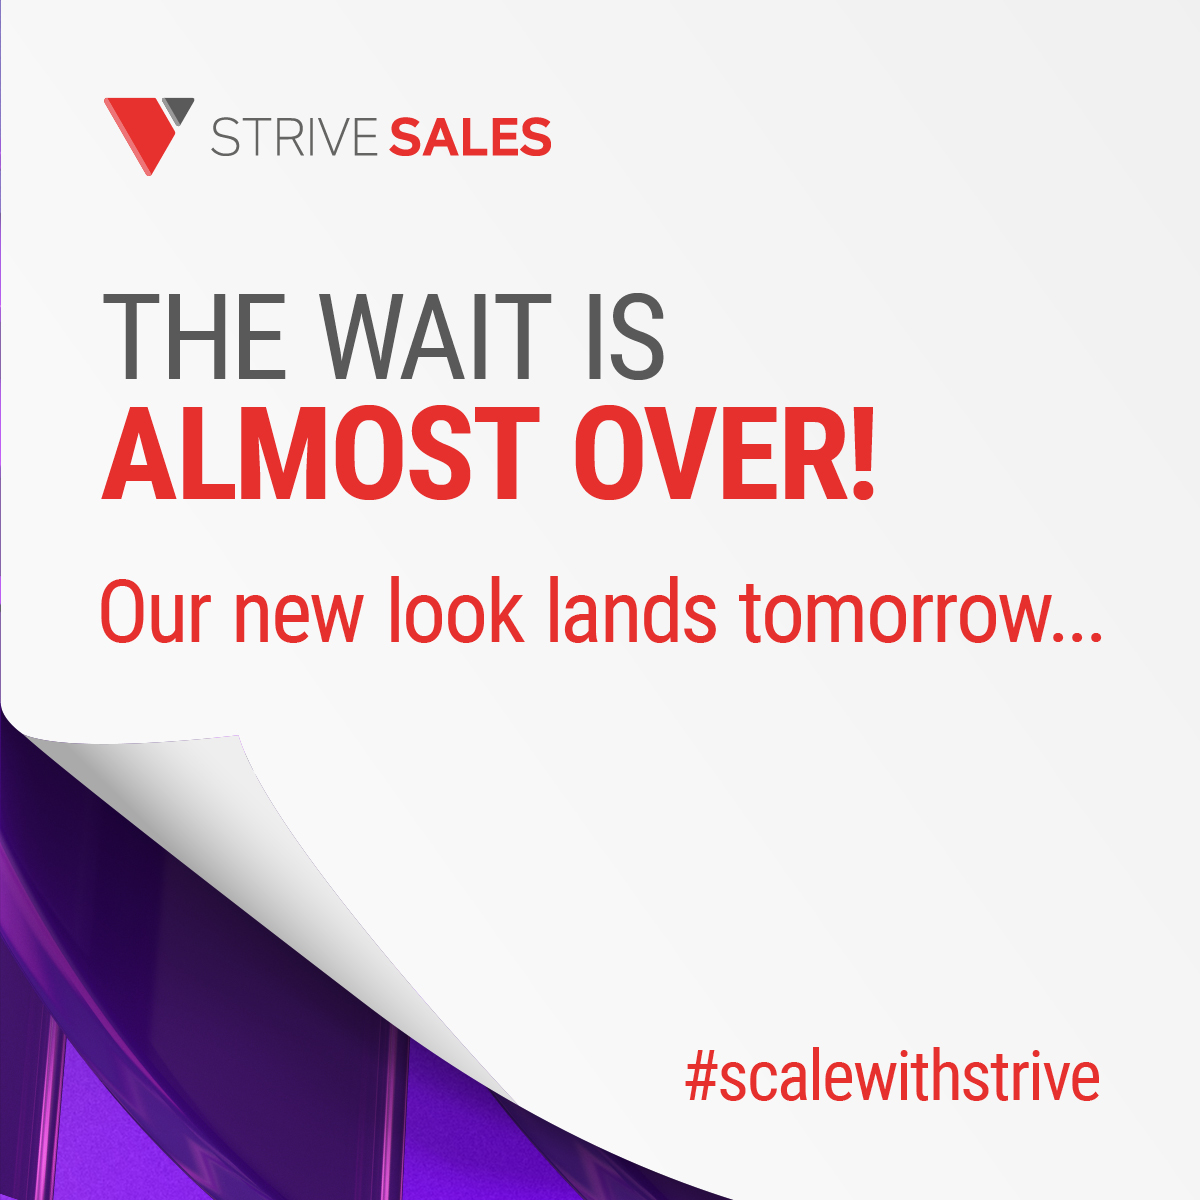 🚨 Landing tomorrow 🚨

Head to our Strive company page tomorrow for a 𝐯𝐞𝐫𝐲 exciting unveiling! 

#scalewithstrive #companyannouncement #companynews